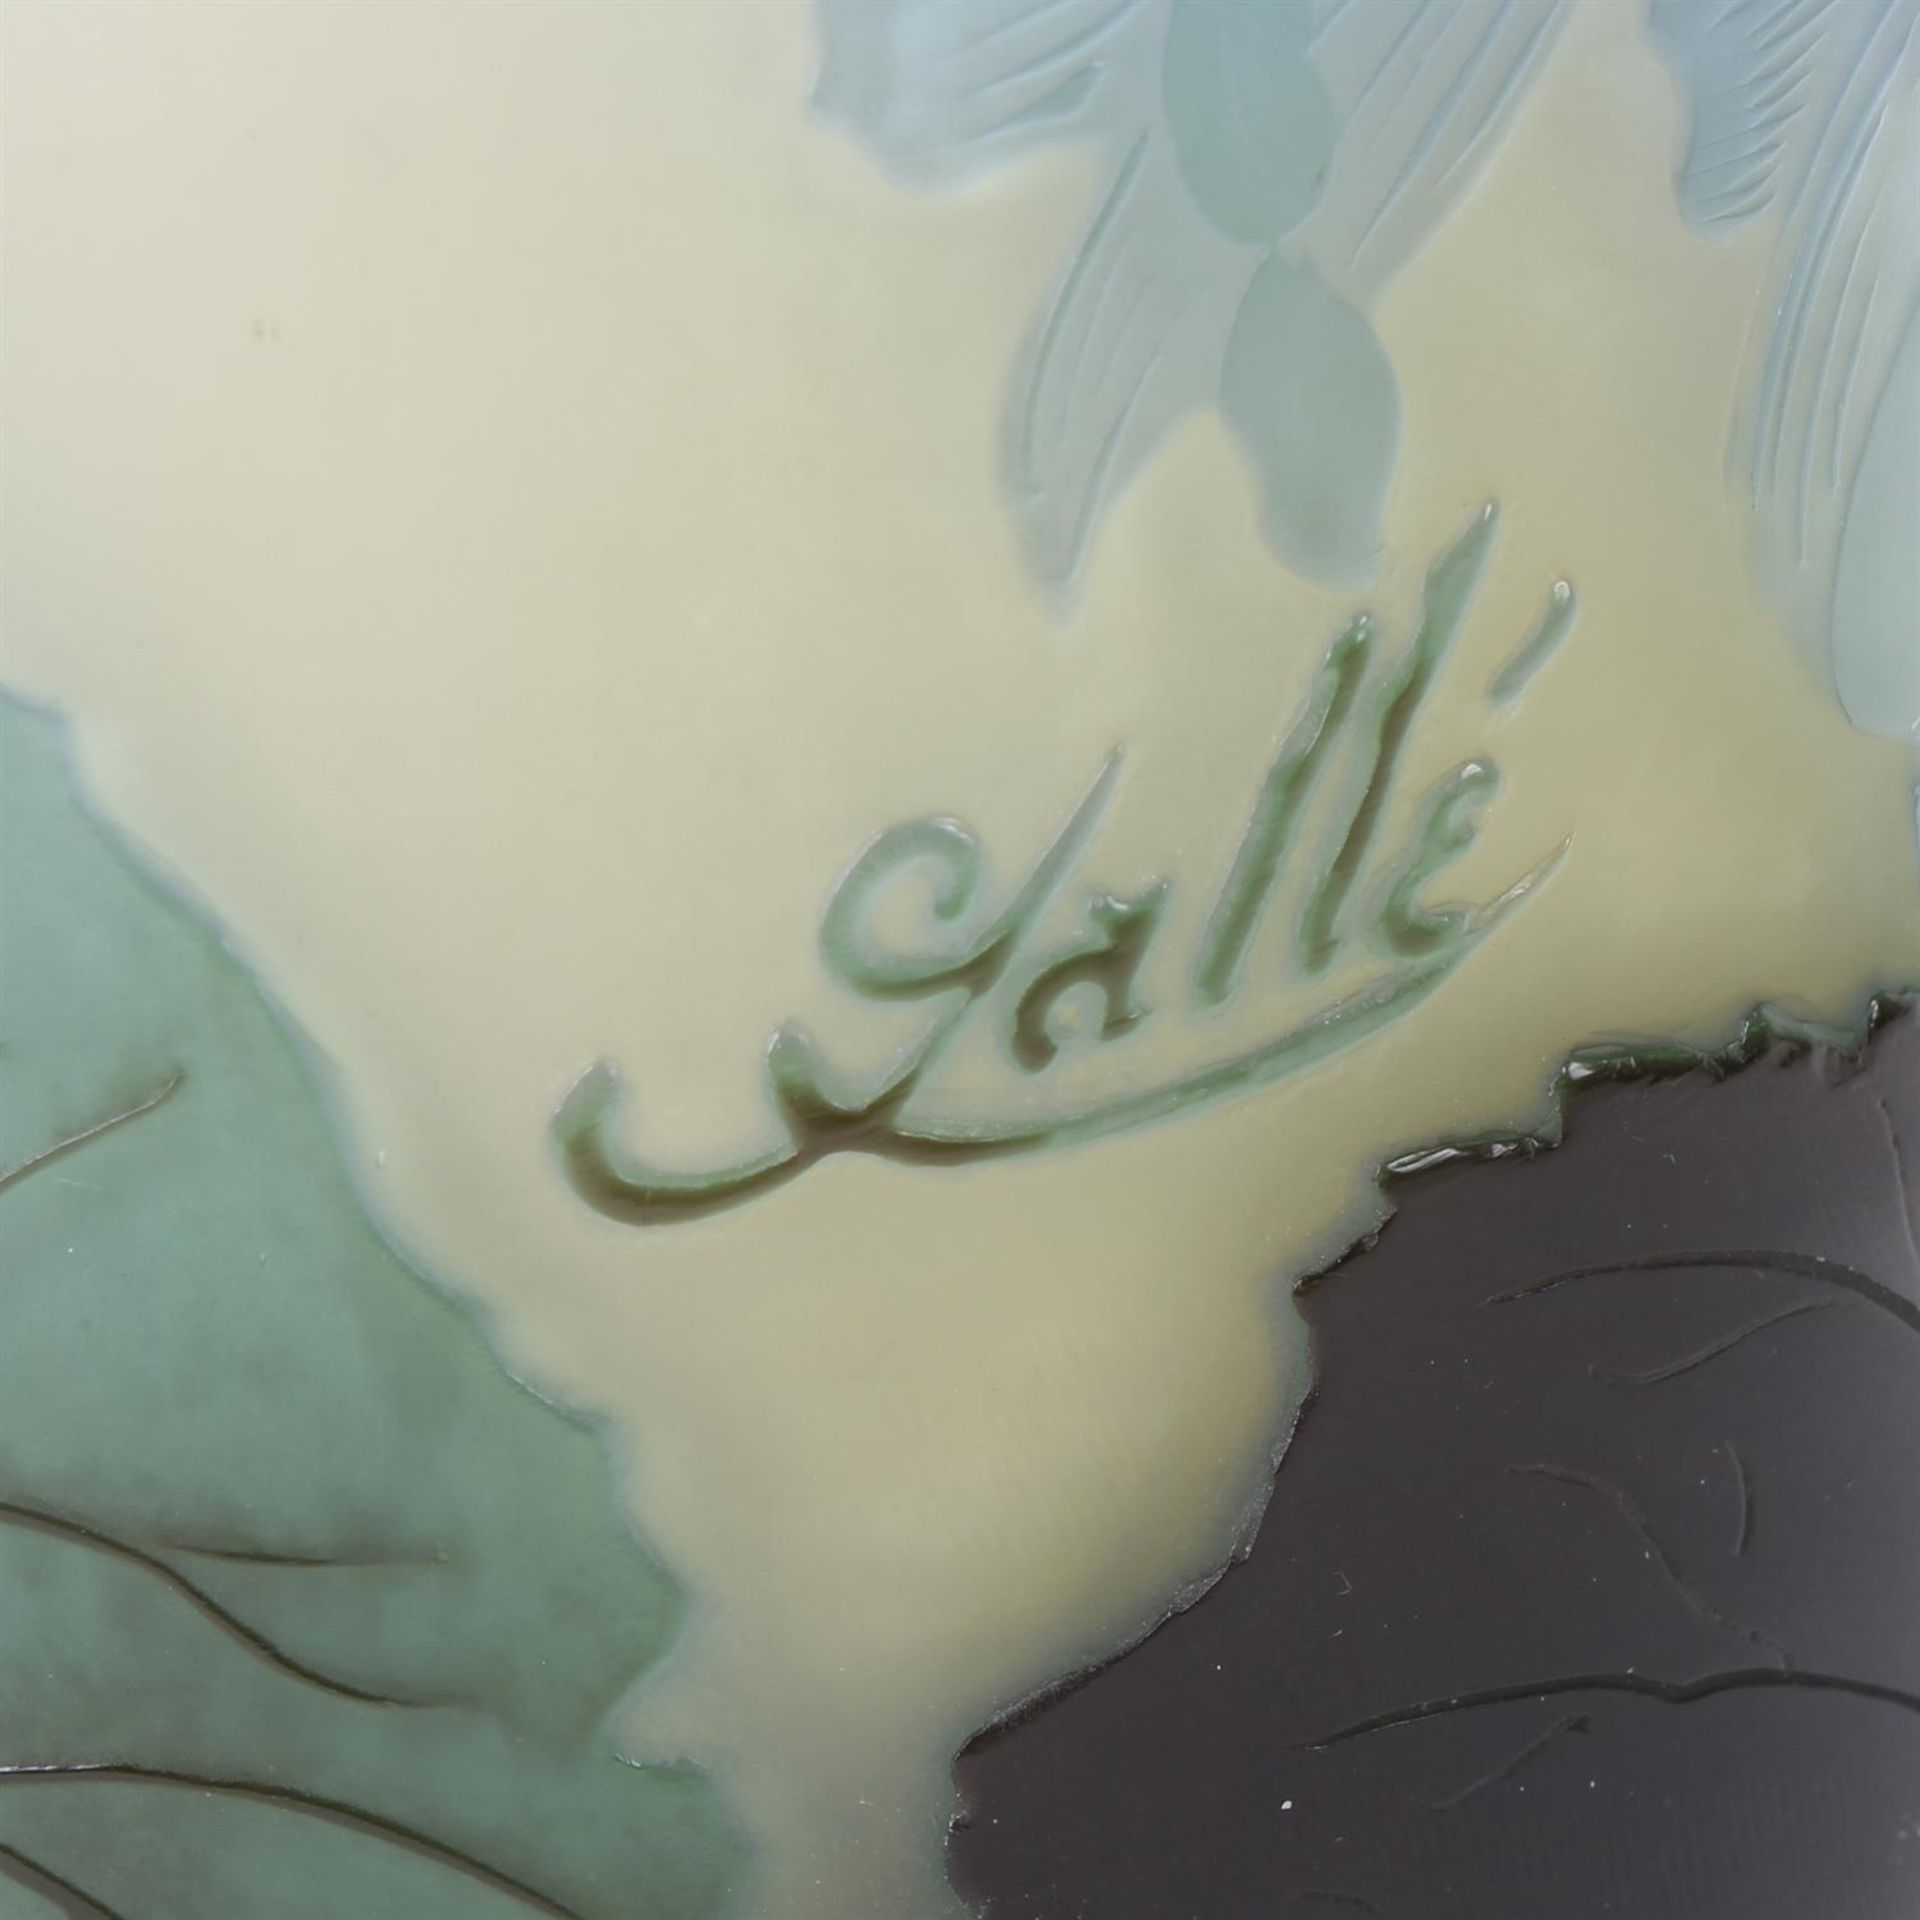 Emile Galle cameo glass vase with daisies - Image 3 of 8